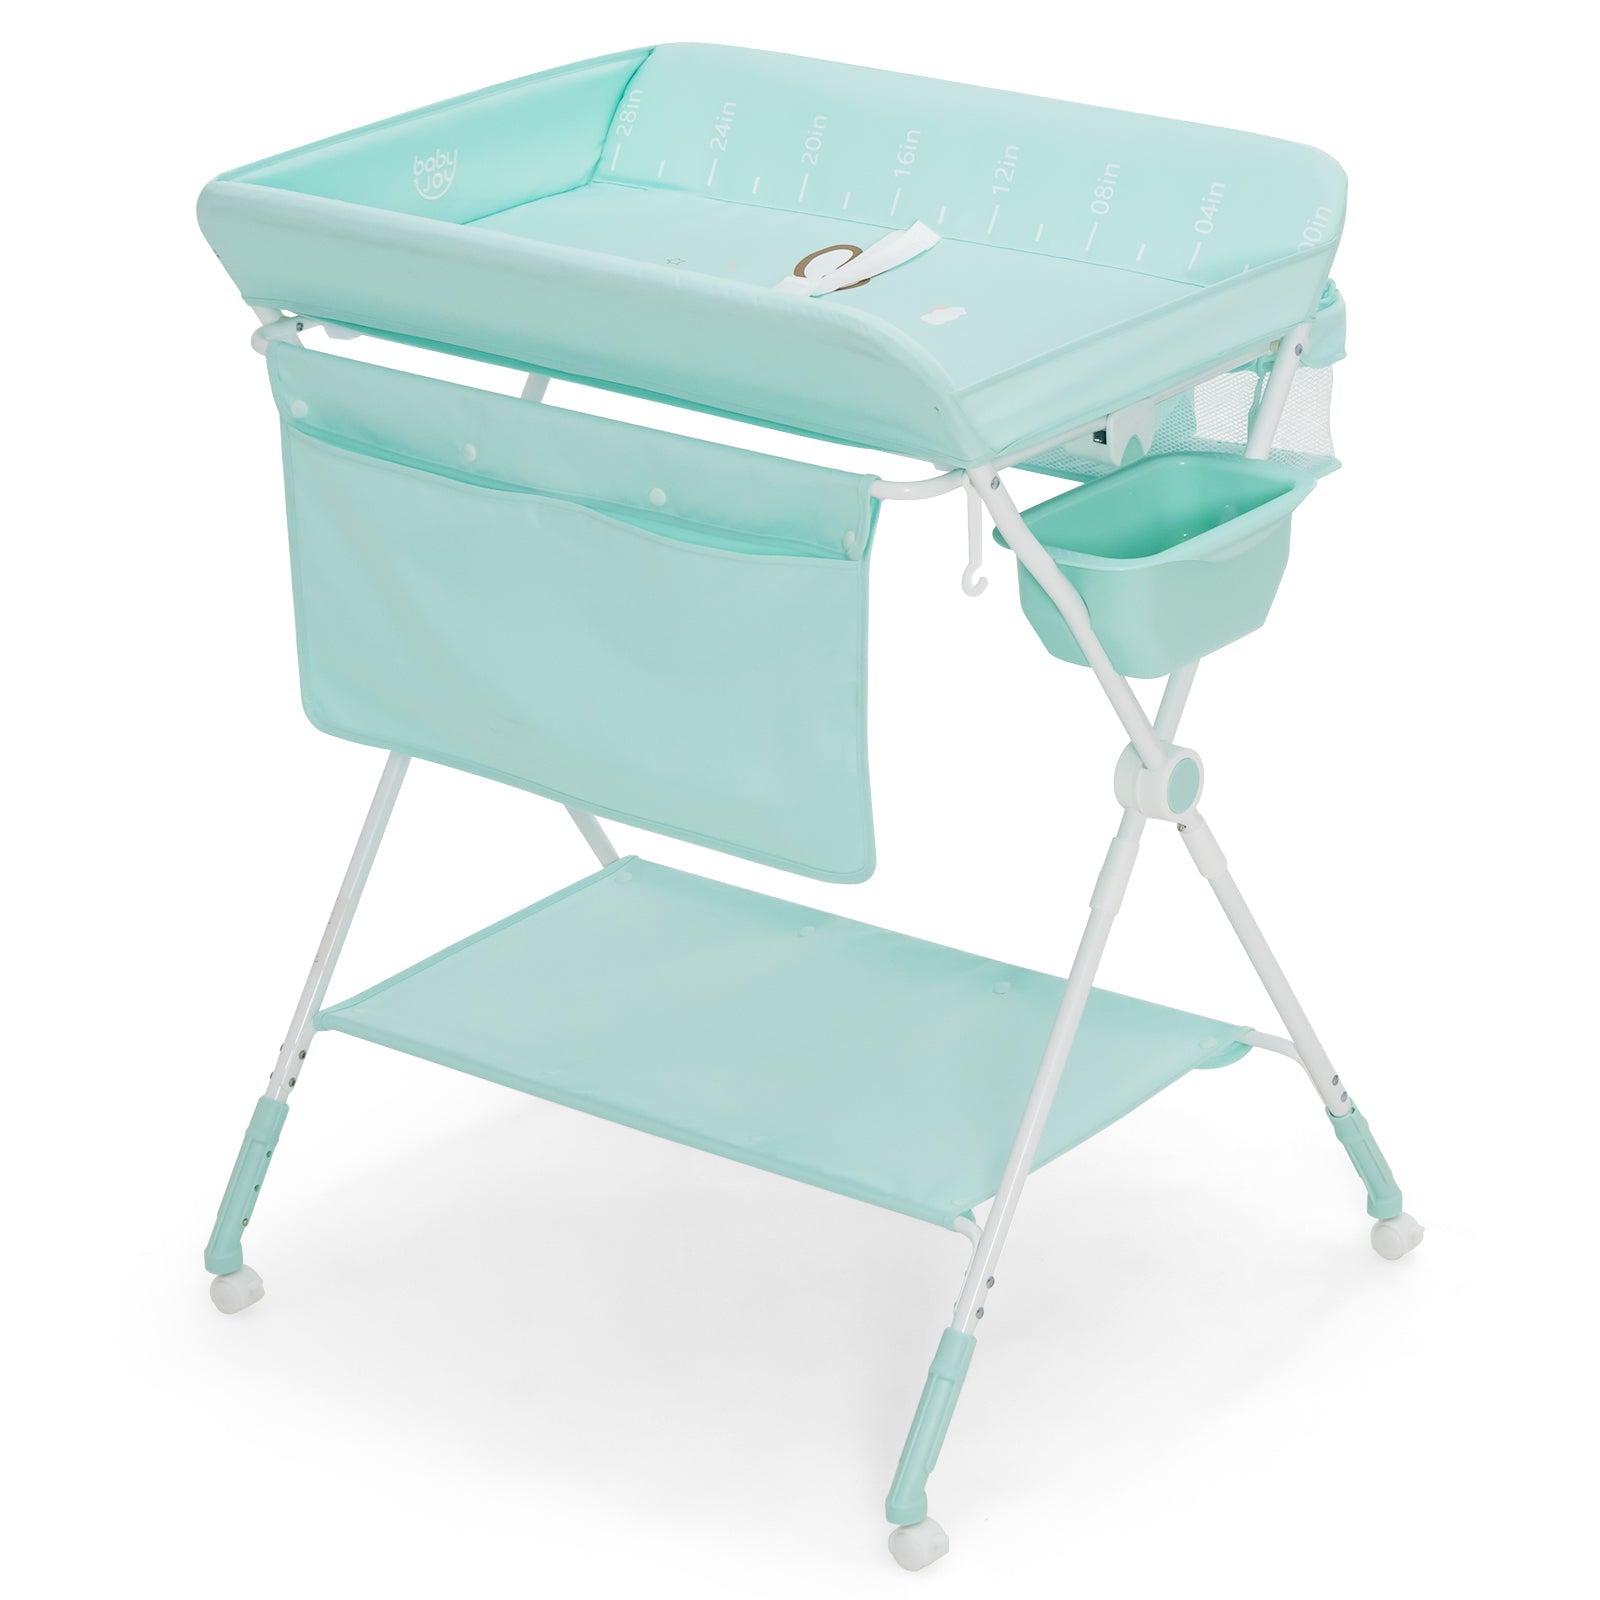 Portable Folding Changing Table - Infant Nursery Convenience